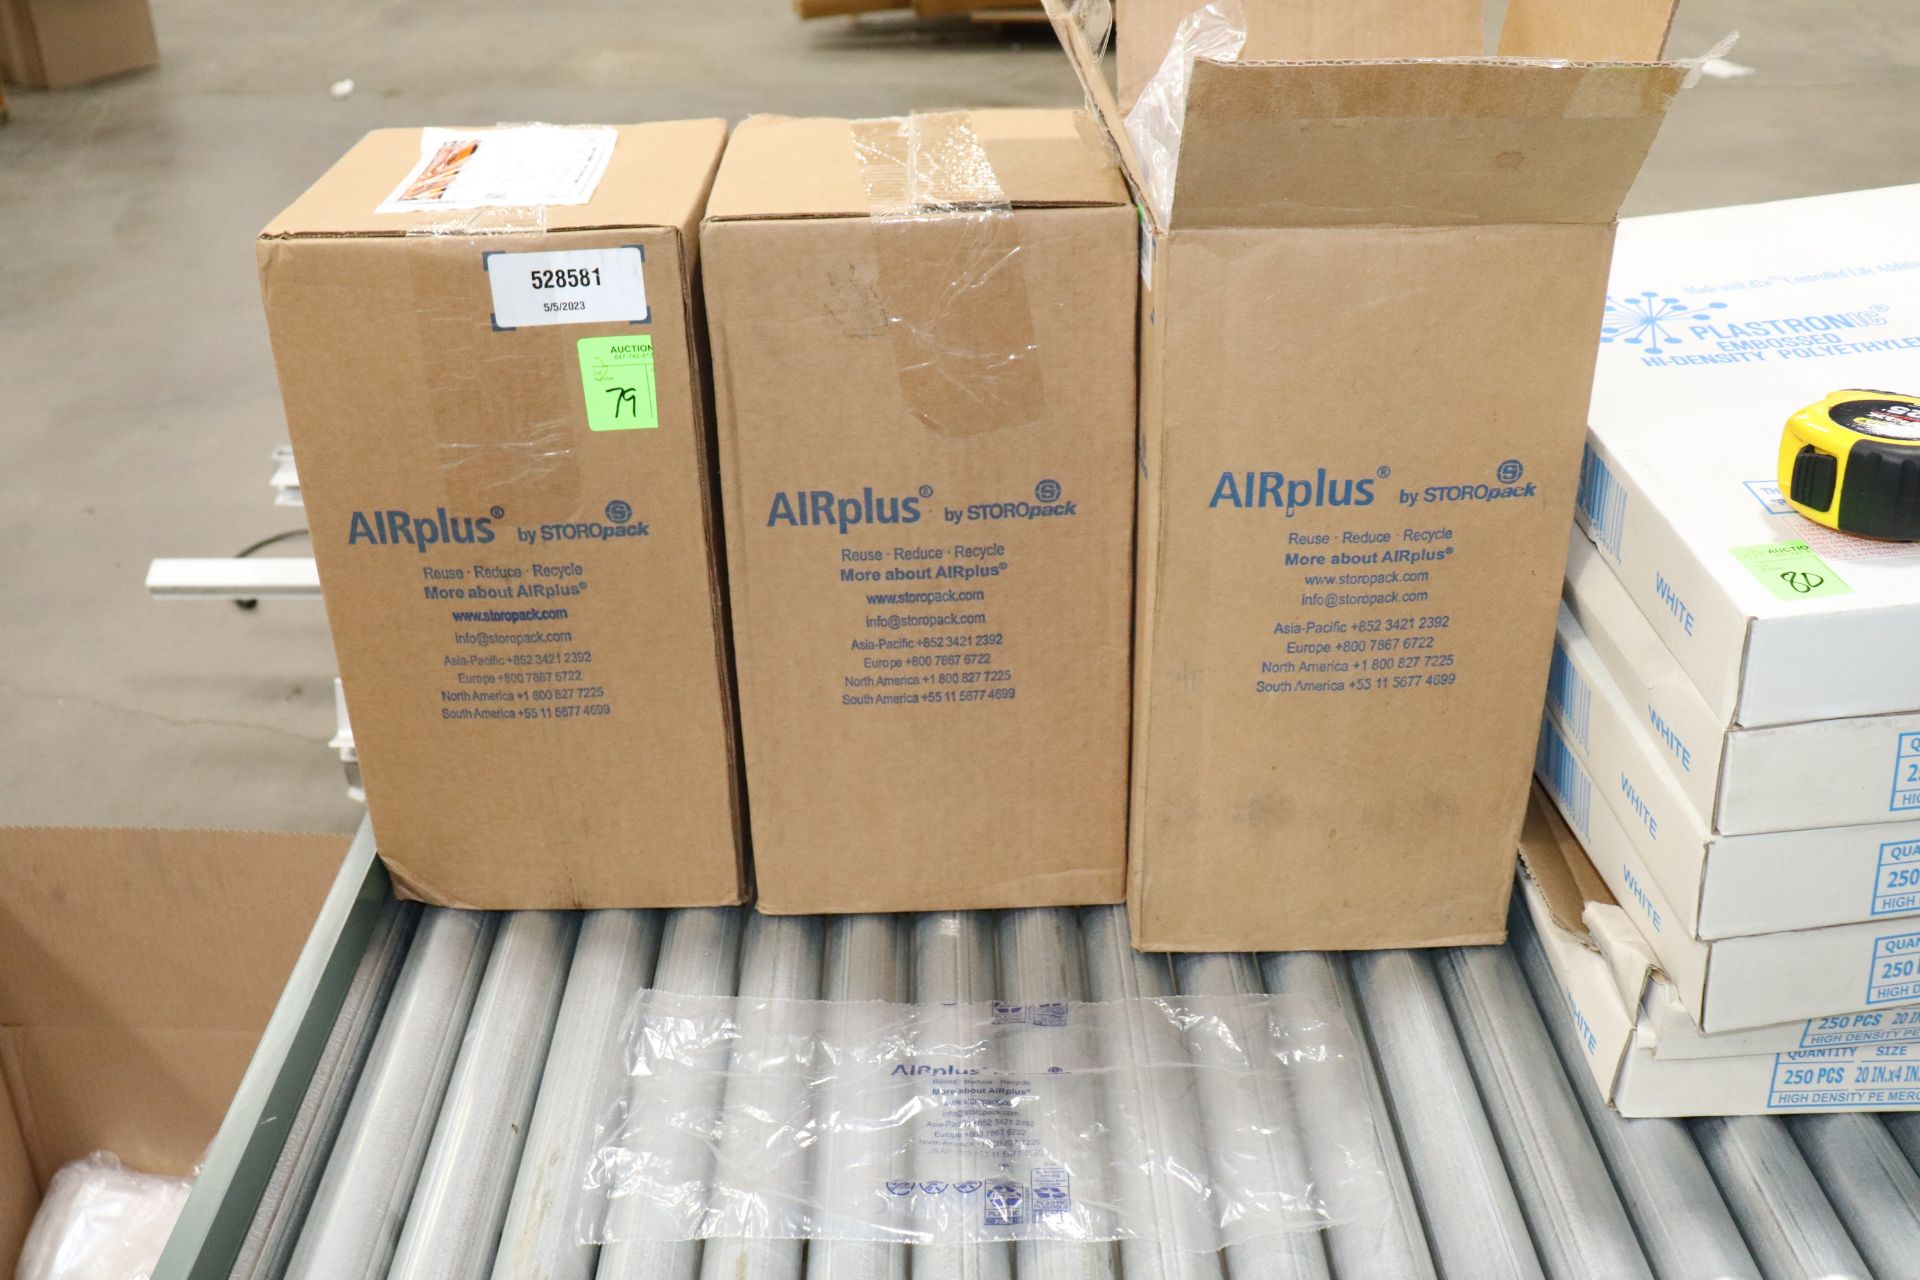 Three boxes of AIRplus by Storopack Inflatable packing storage, Model PR16P1X13B420, each bag 15.5"